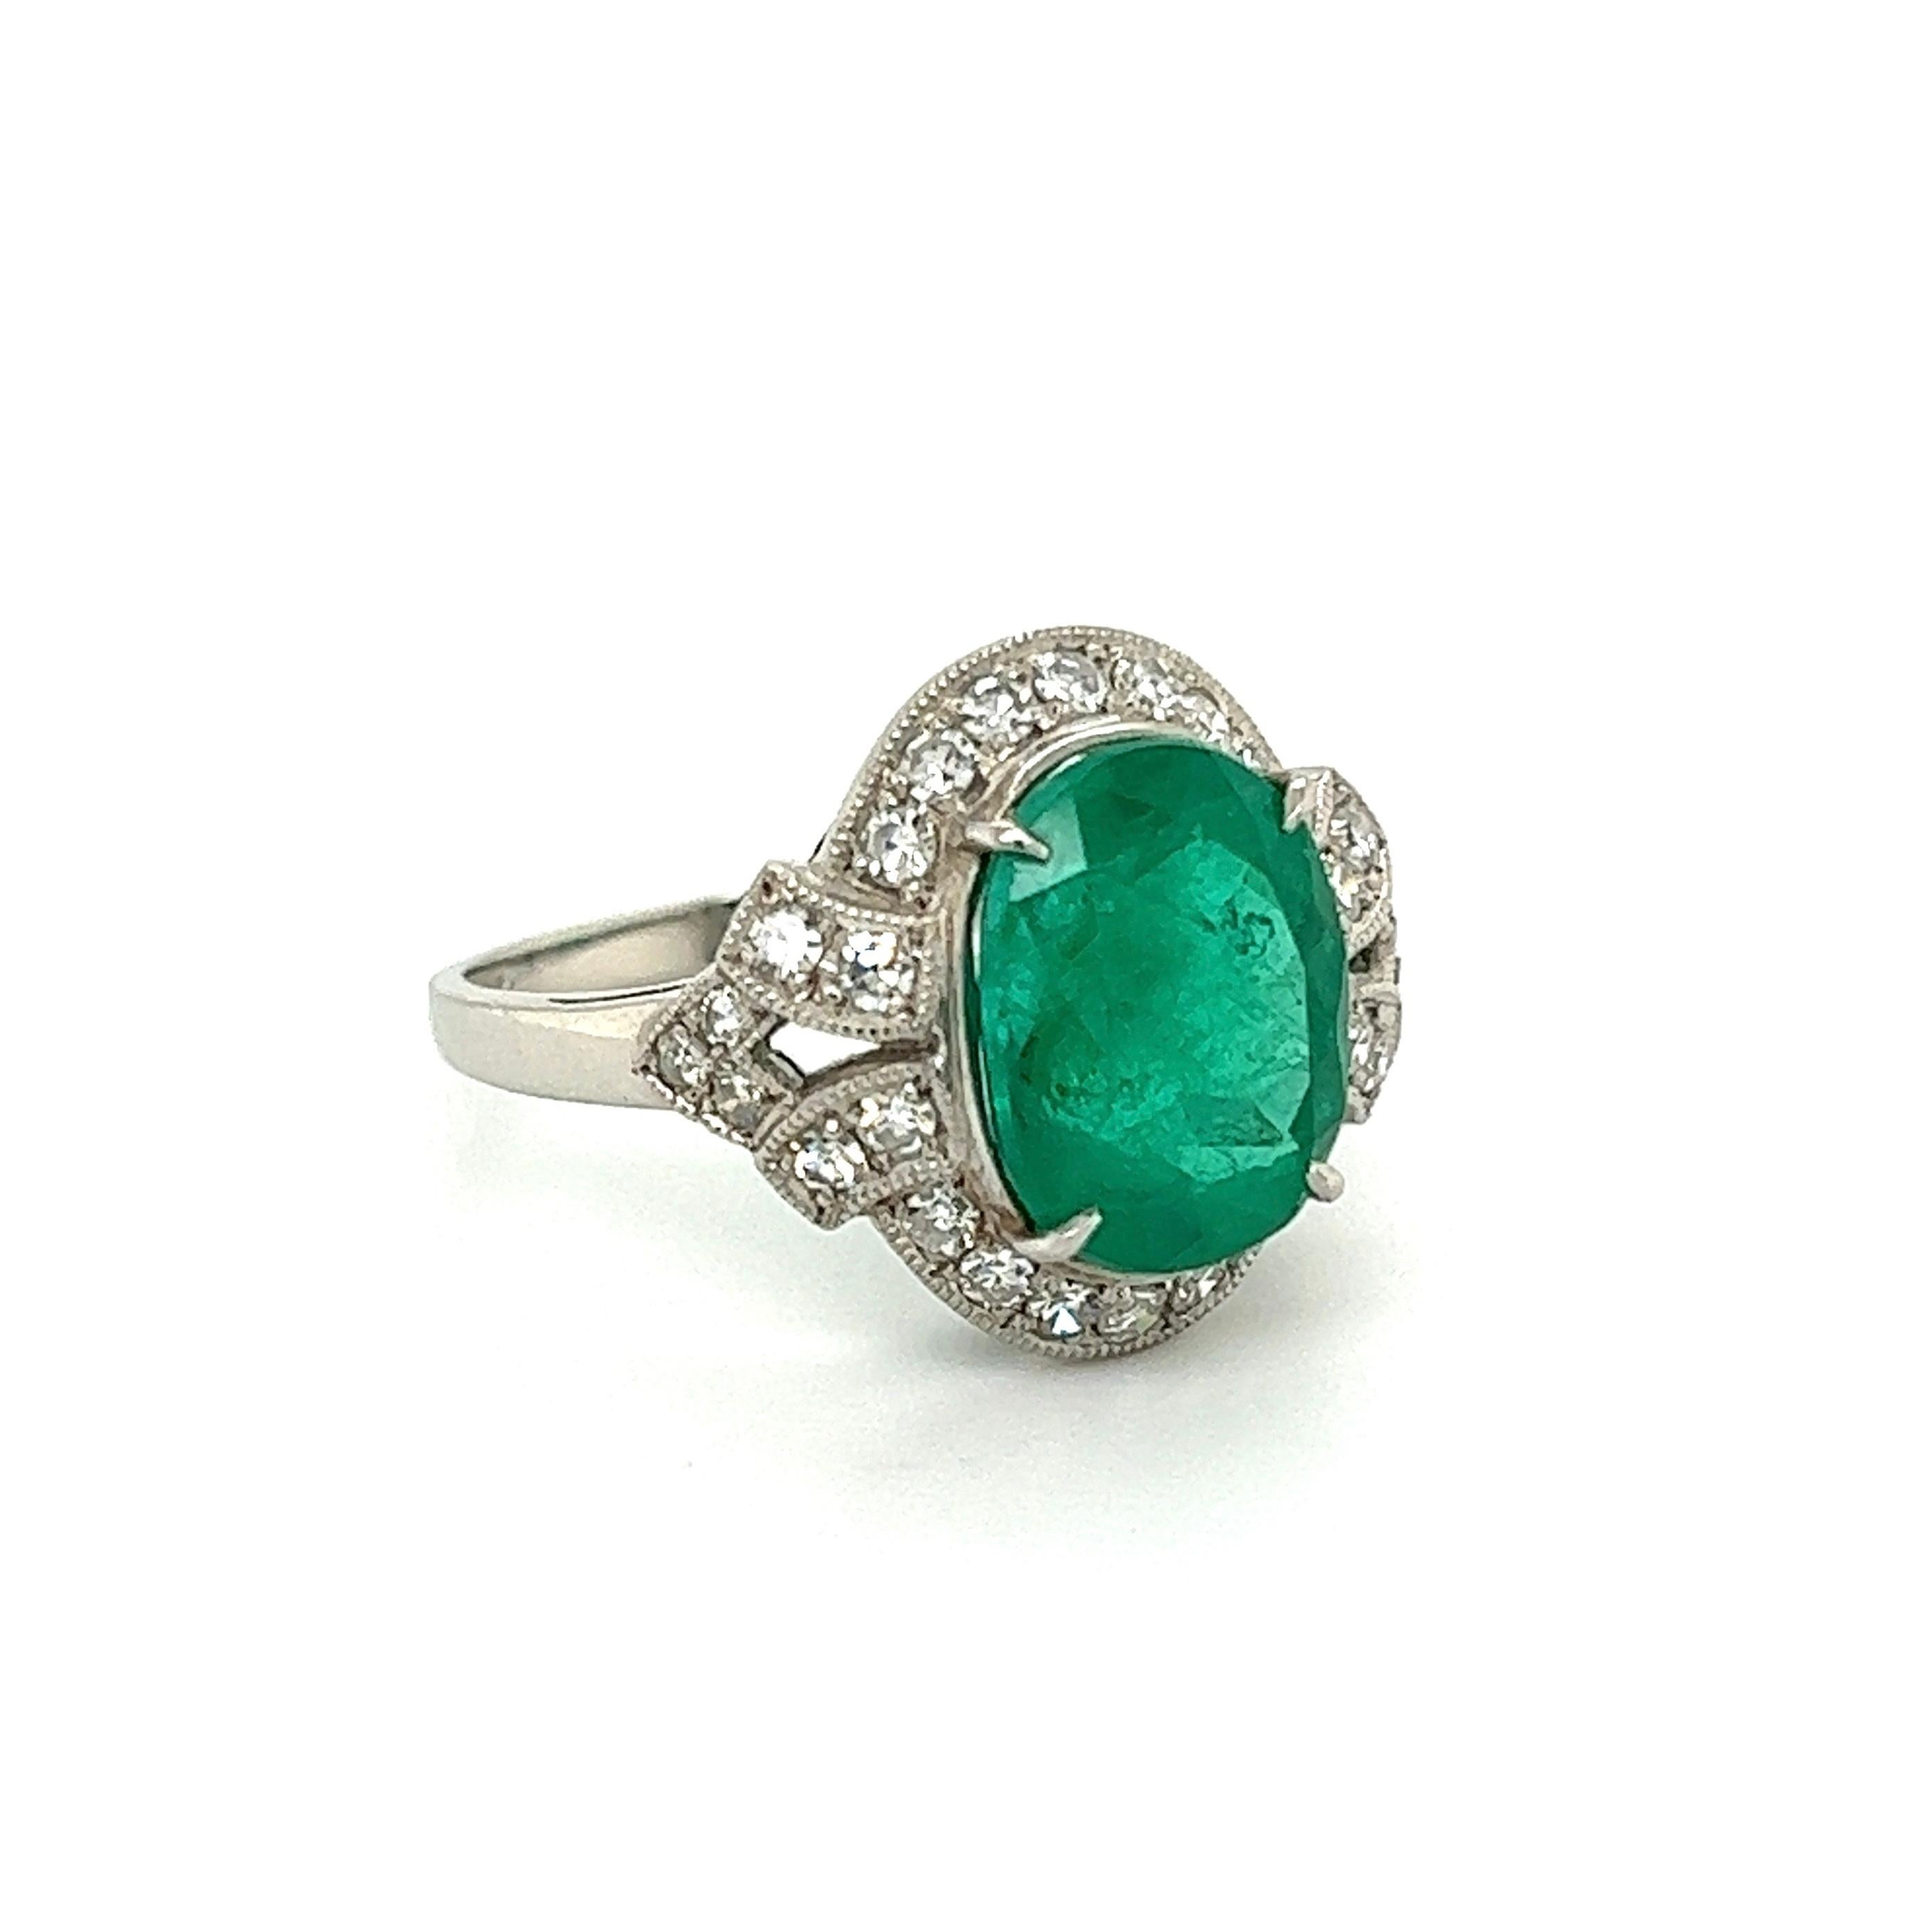 Simply Beautiful! Art Deco Revival Emerald and Diamond Platinum Ring. Centering a securely nestled Hand set 4.20 Carat Oval Emerald, surrounded by Diamonds approx. 0.61tcw. Artistically Hand-crafted Platinum mounting. Ring size 6.75, we offer ring